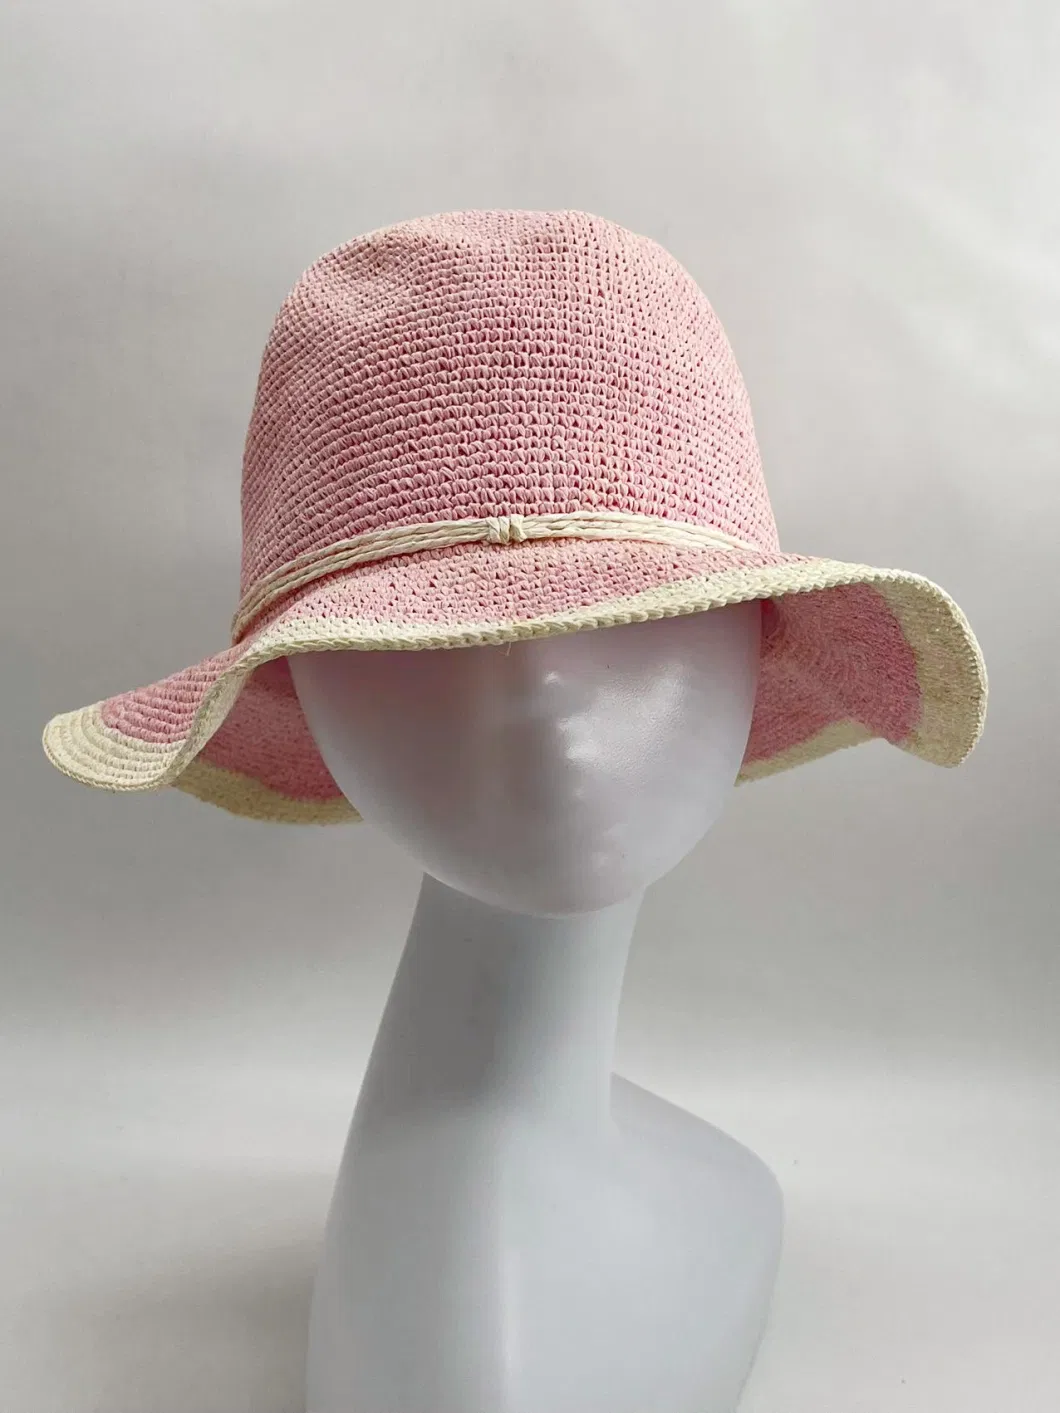 Paper Rope Handmade Fine Crochet Summer Hat Pink White Patchwork Color Women&prime; S Straw Hat Shade Breathable Pink